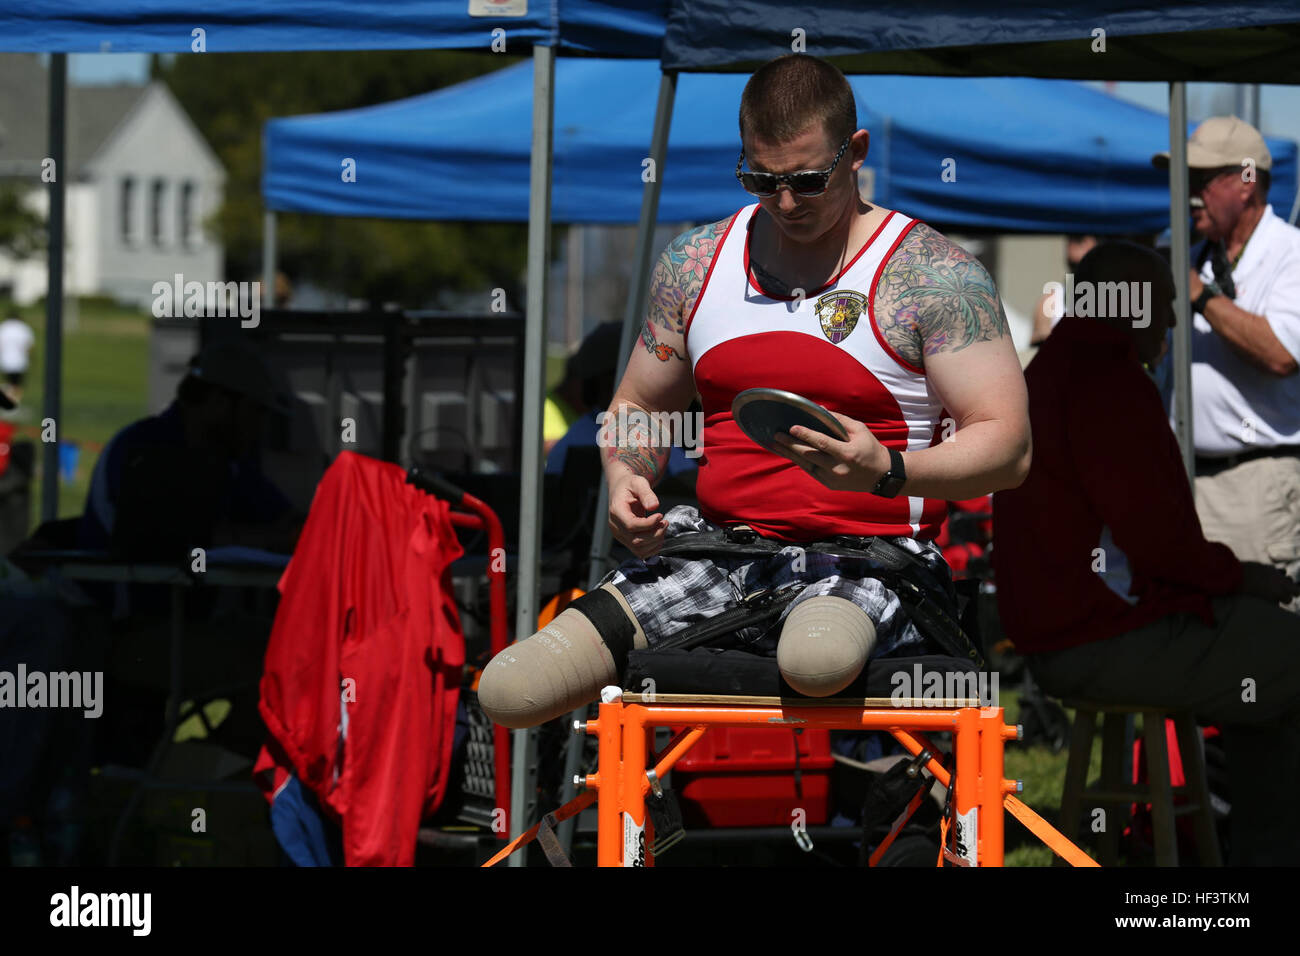 A U.S. Marine with the Wounded Warrior Regiment prepares to launch the discus during the field competition at the Marine Corps Trials aboard Marine Corps Base Camp Pendleton, Calif., March 9, 2016. The Trials, an eight-event adaptive sports competition, is hosted by the Wounded Warrior Regiment, the Marine Corps command that facilitates the integration of non-medical and medical care to wounded, ill, and injured Marines and their families. The Trials began March 2, 2016, and end March 9, 2016. (U.S. Marine Corps photo by Cpl. Jessika Acosta /Released) Marine Corps Trials- Field Competition 160 Stock Photo